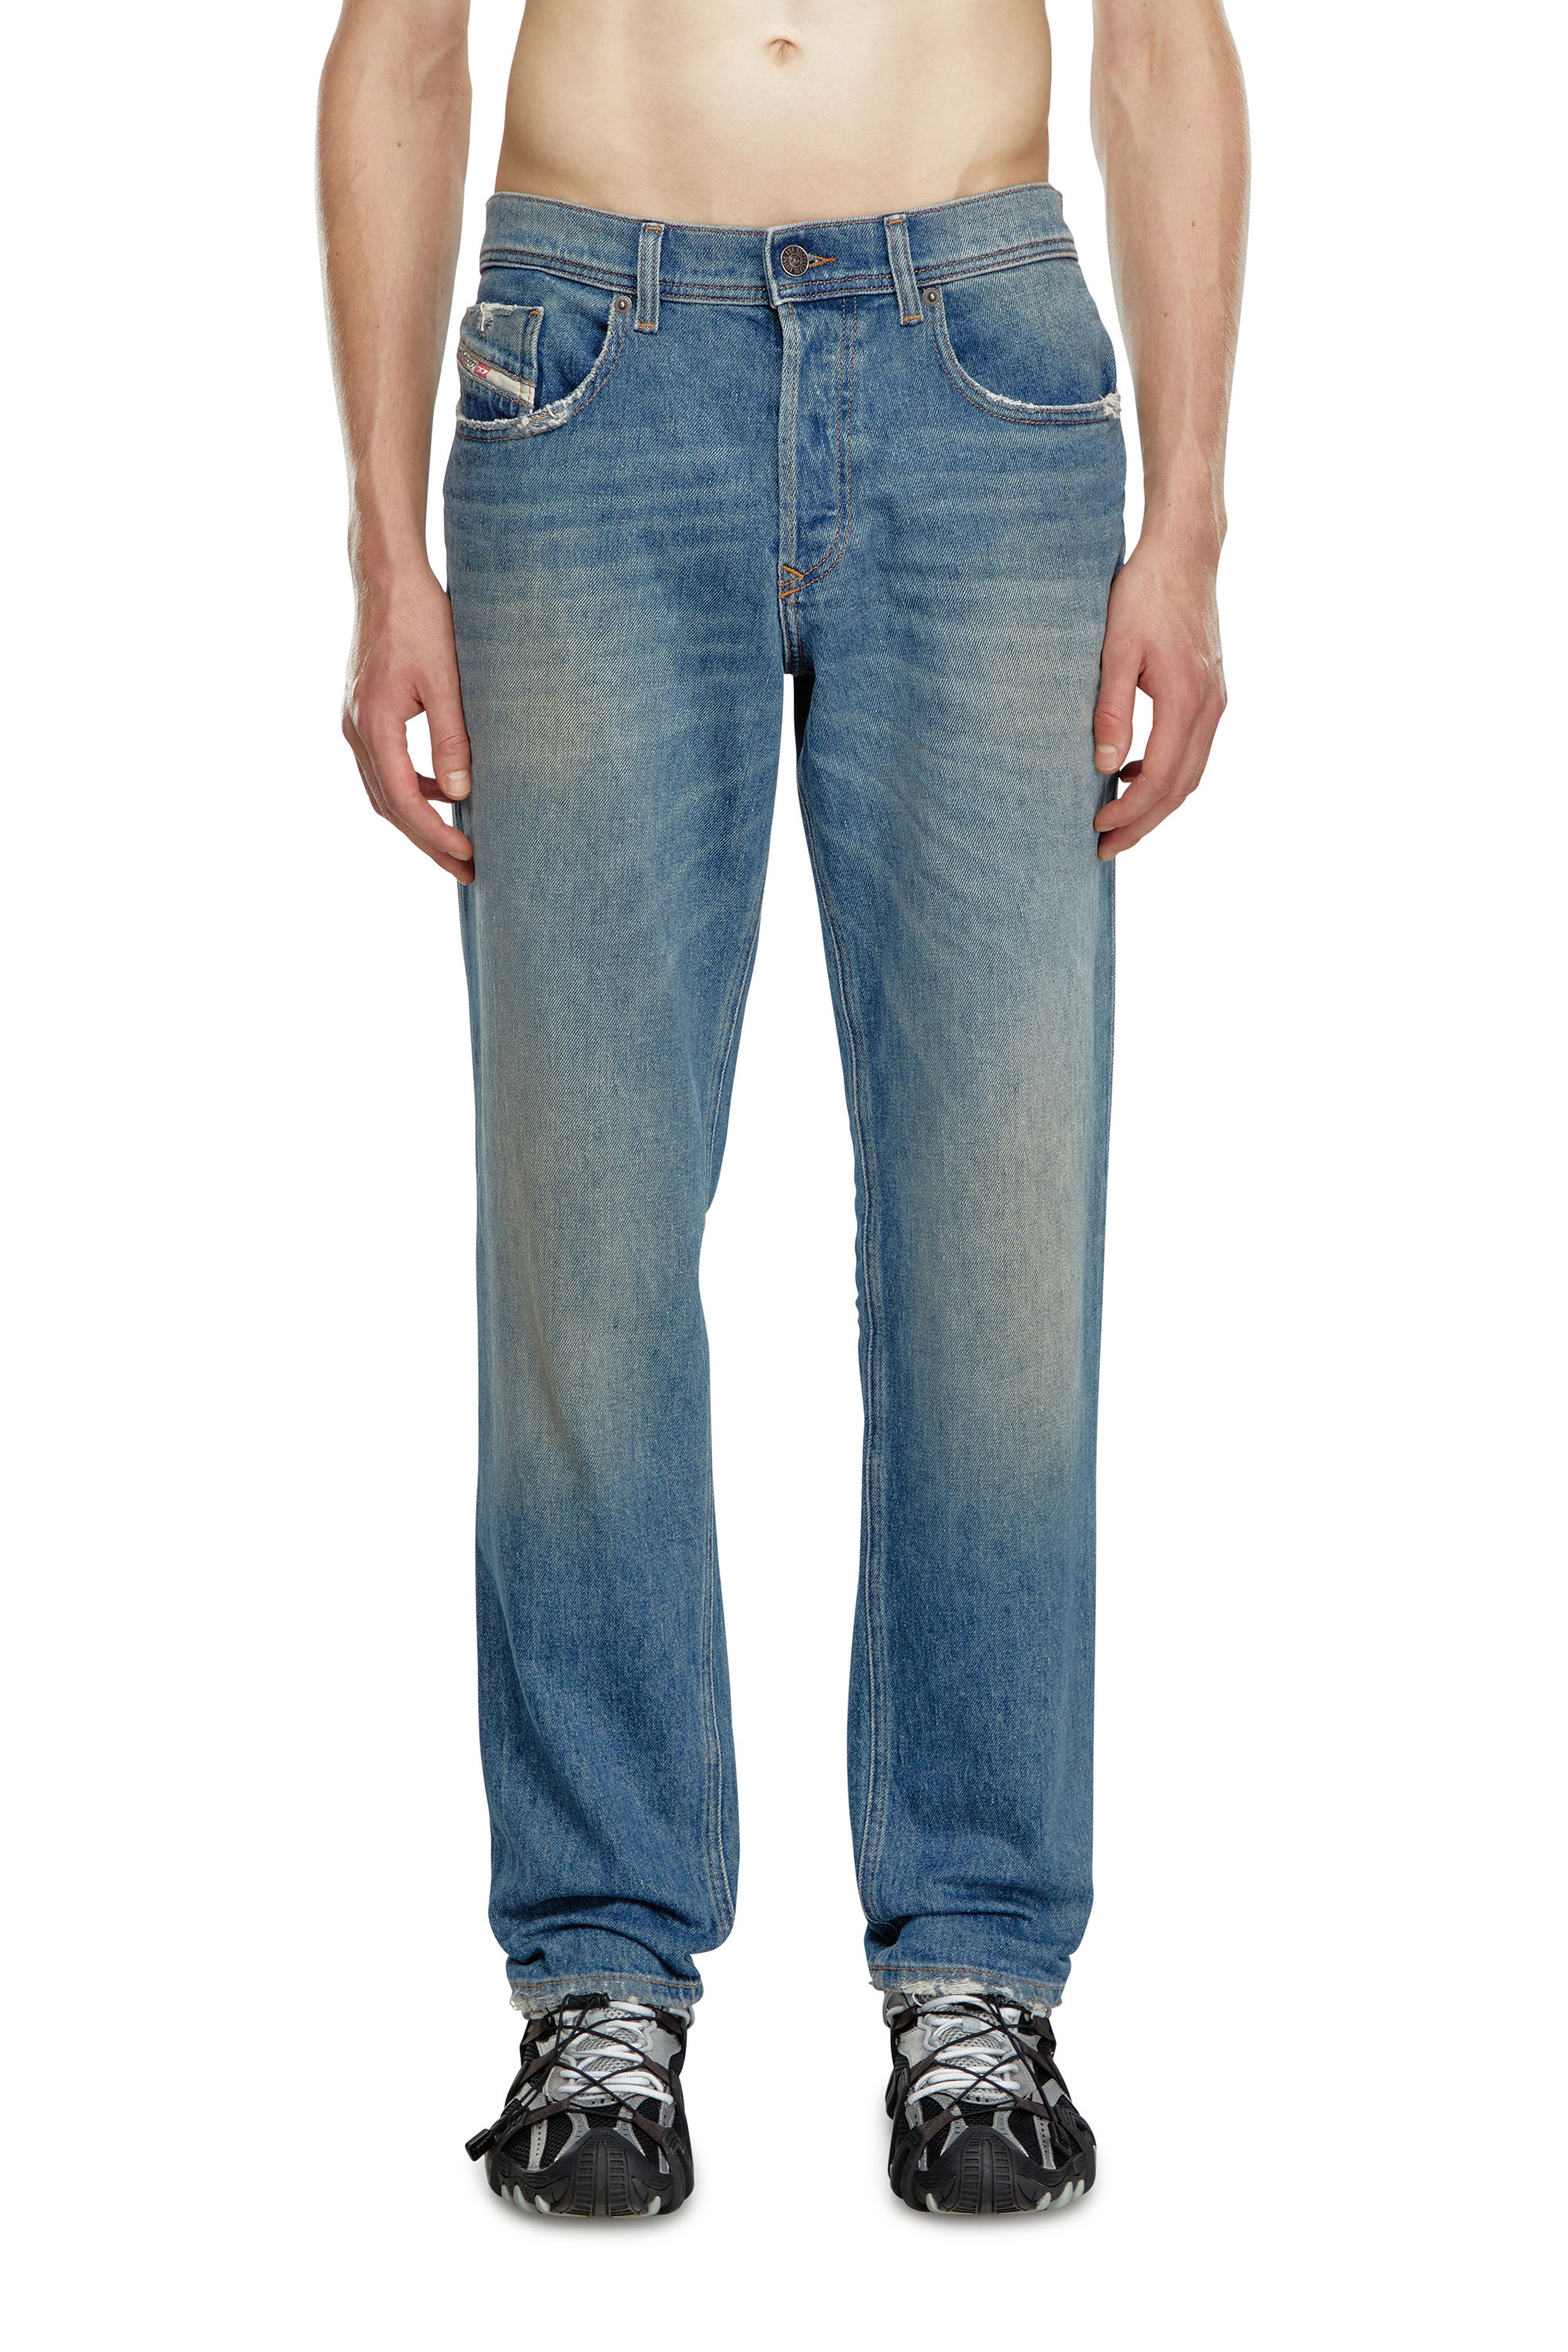 Diesel - Tapered Jeans 2023 D-Finitive 0GRDB, Hombre Tapered Jeans - 2023 D-Finitive in Azul marino - Image 1